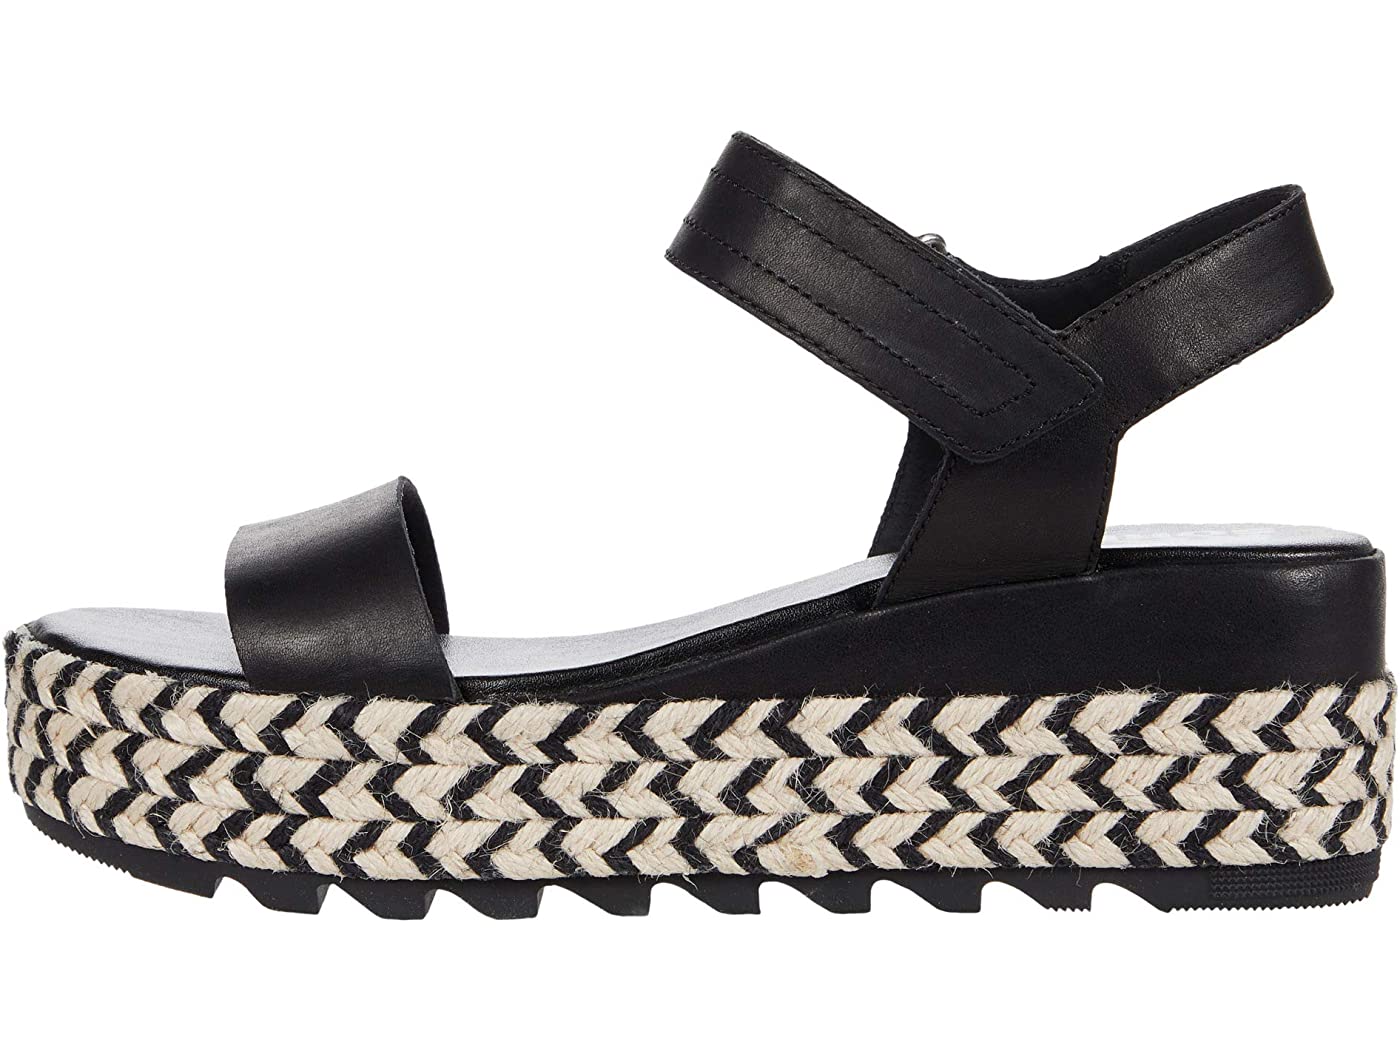 Sorel Flatform Sandals Will Make Your Feet Feel Comfy and Happy | Us Weekly